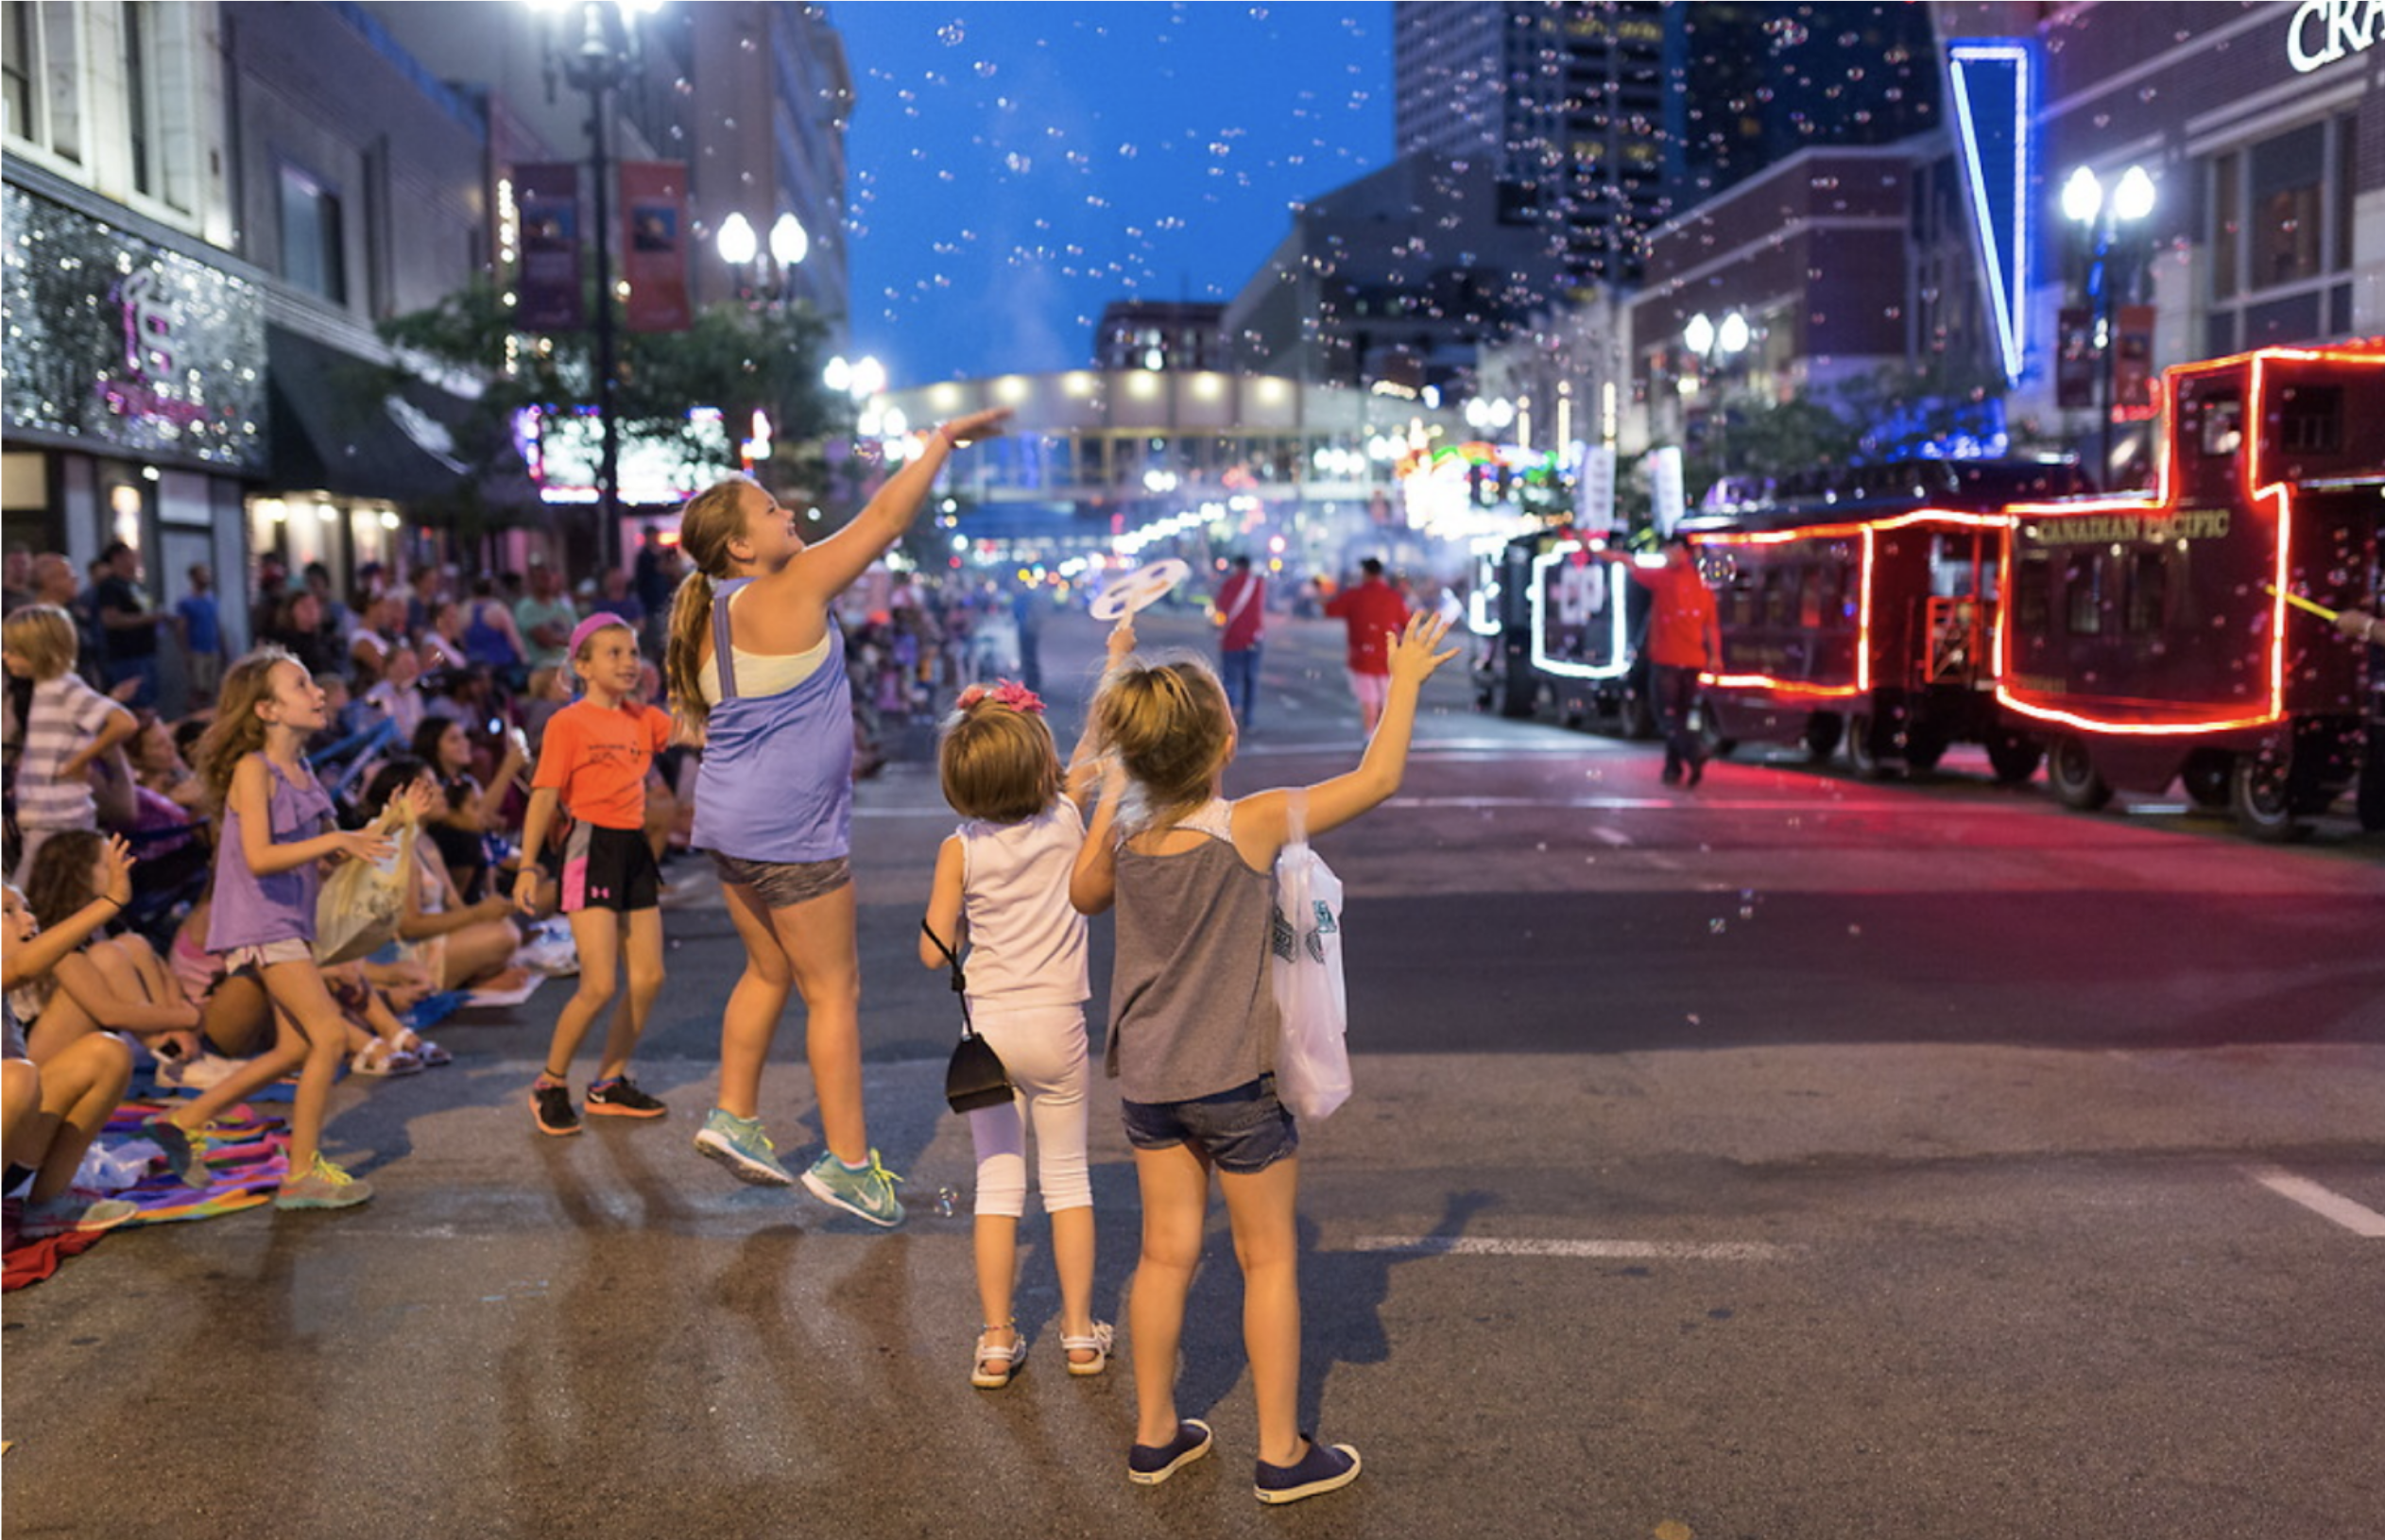 Kids watching a parade at night on a city street